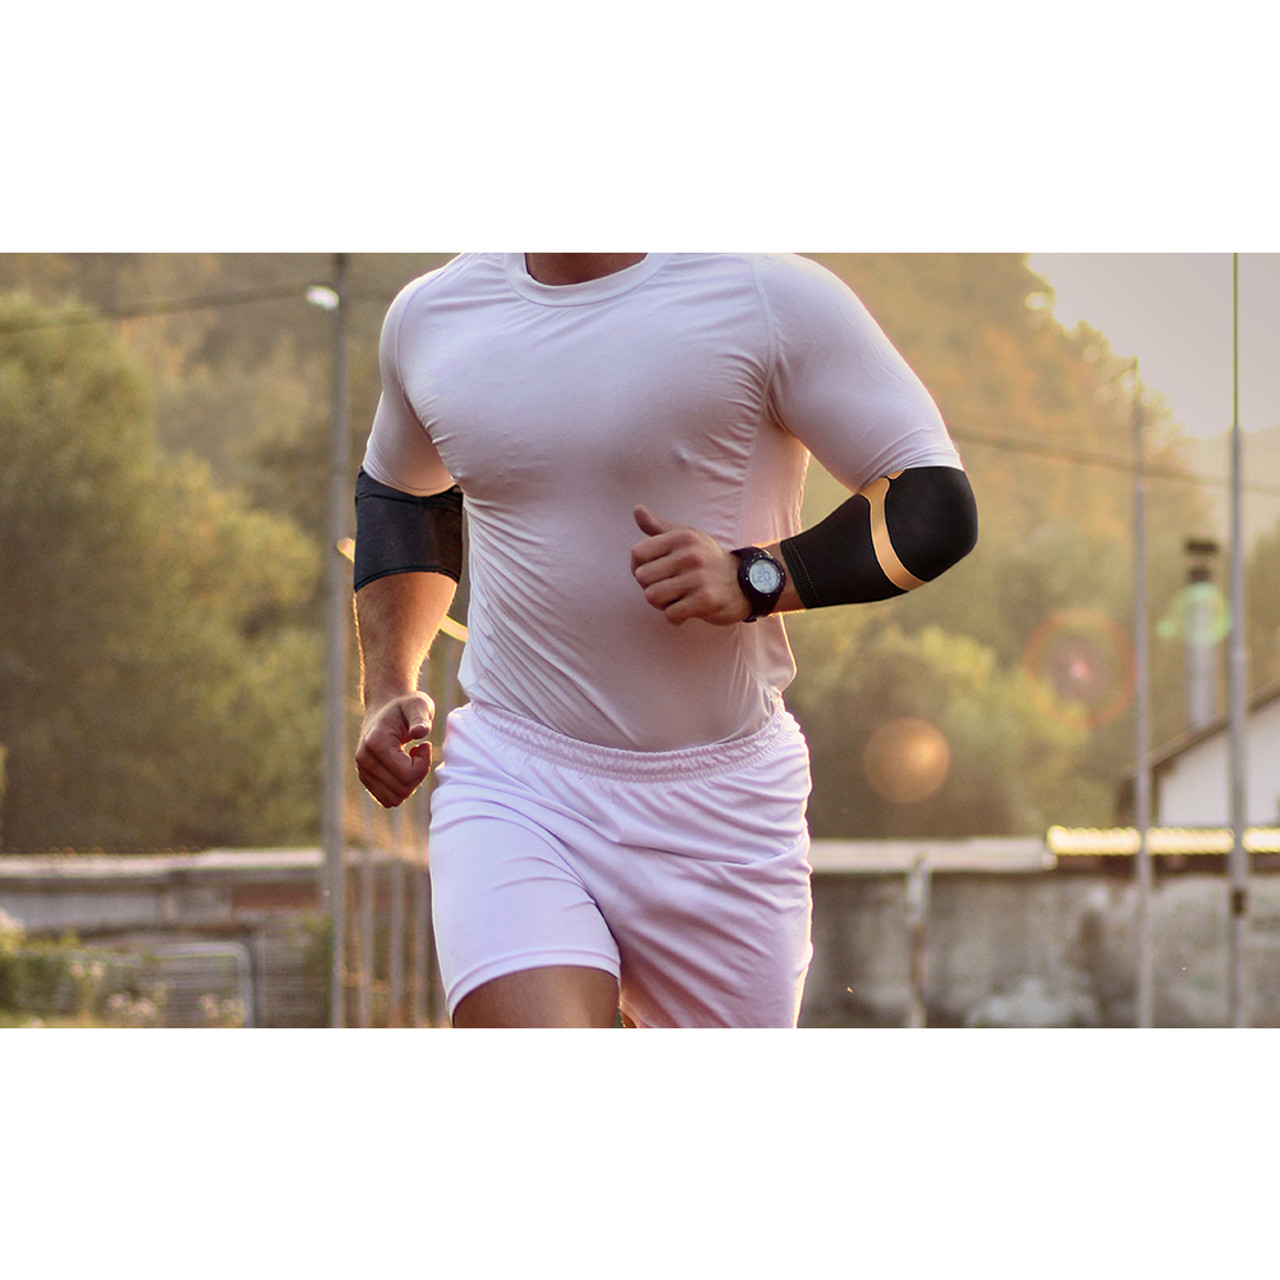 Copper Compression Elbow Support Sleeve for Pain Relief (1-Pair) product image